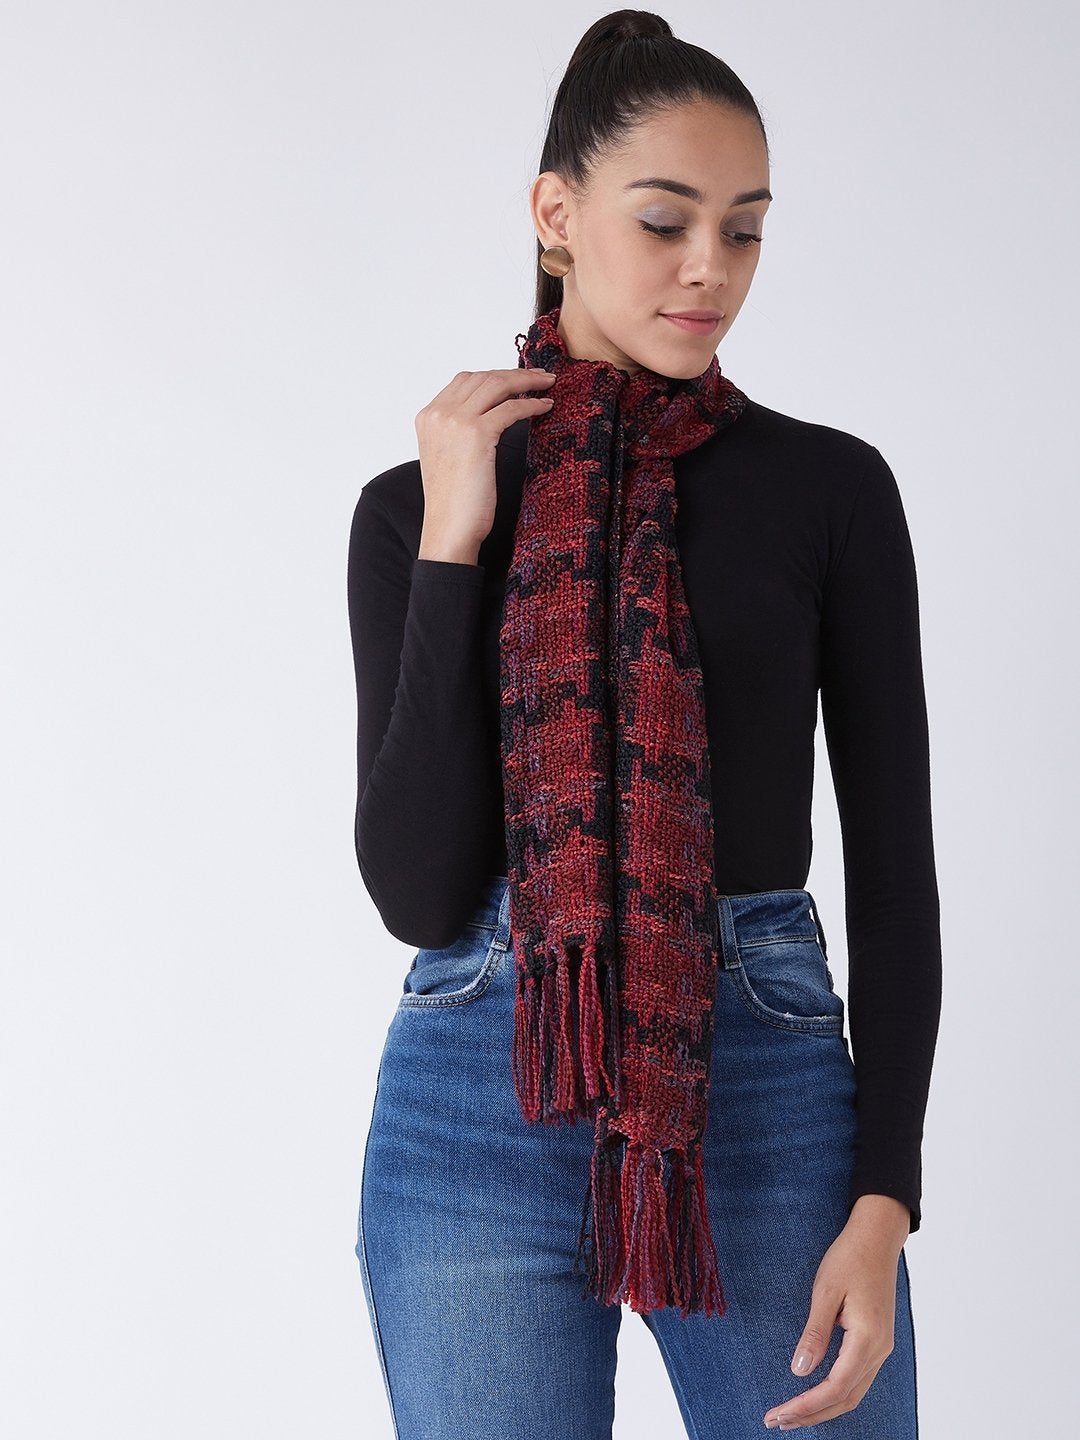 Women's Maroon And Black Winter Stole - InWeave